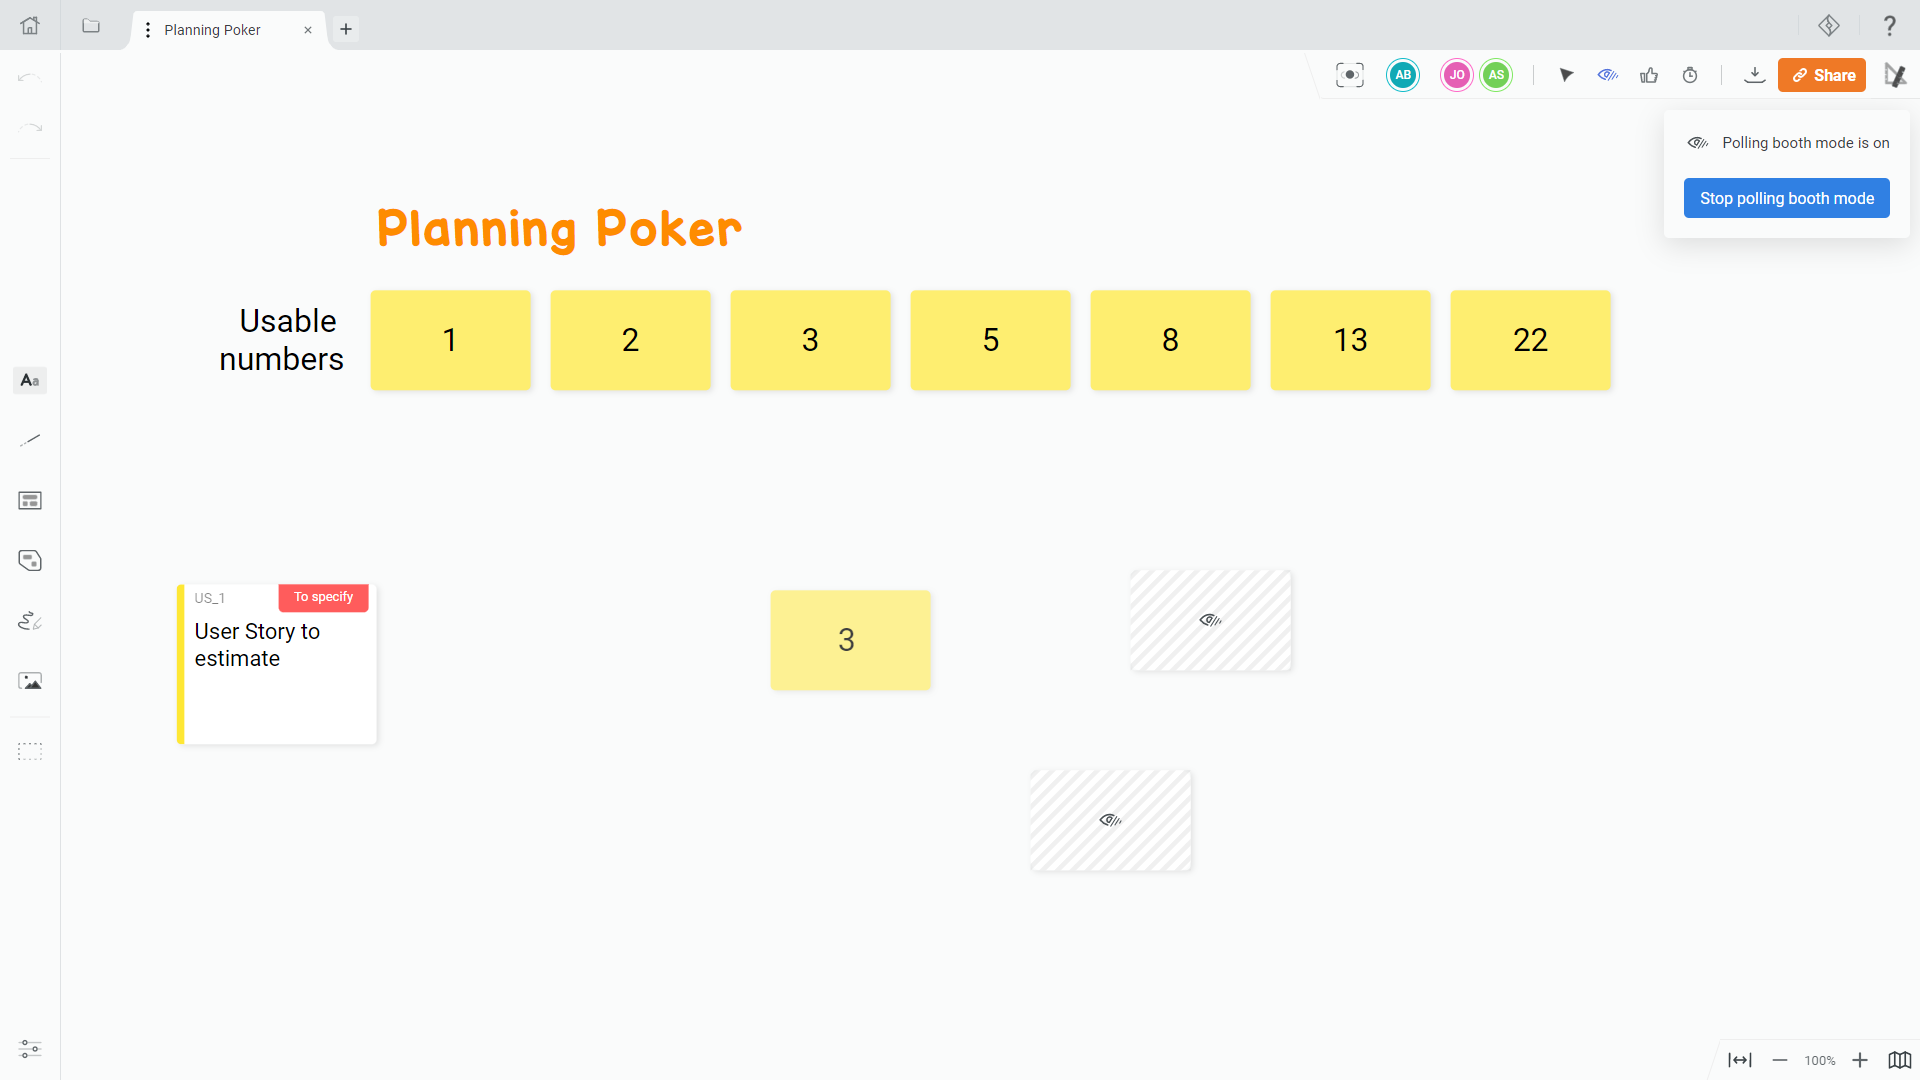 Draft.io - Panning Poker - Round 1 with polling booth mode